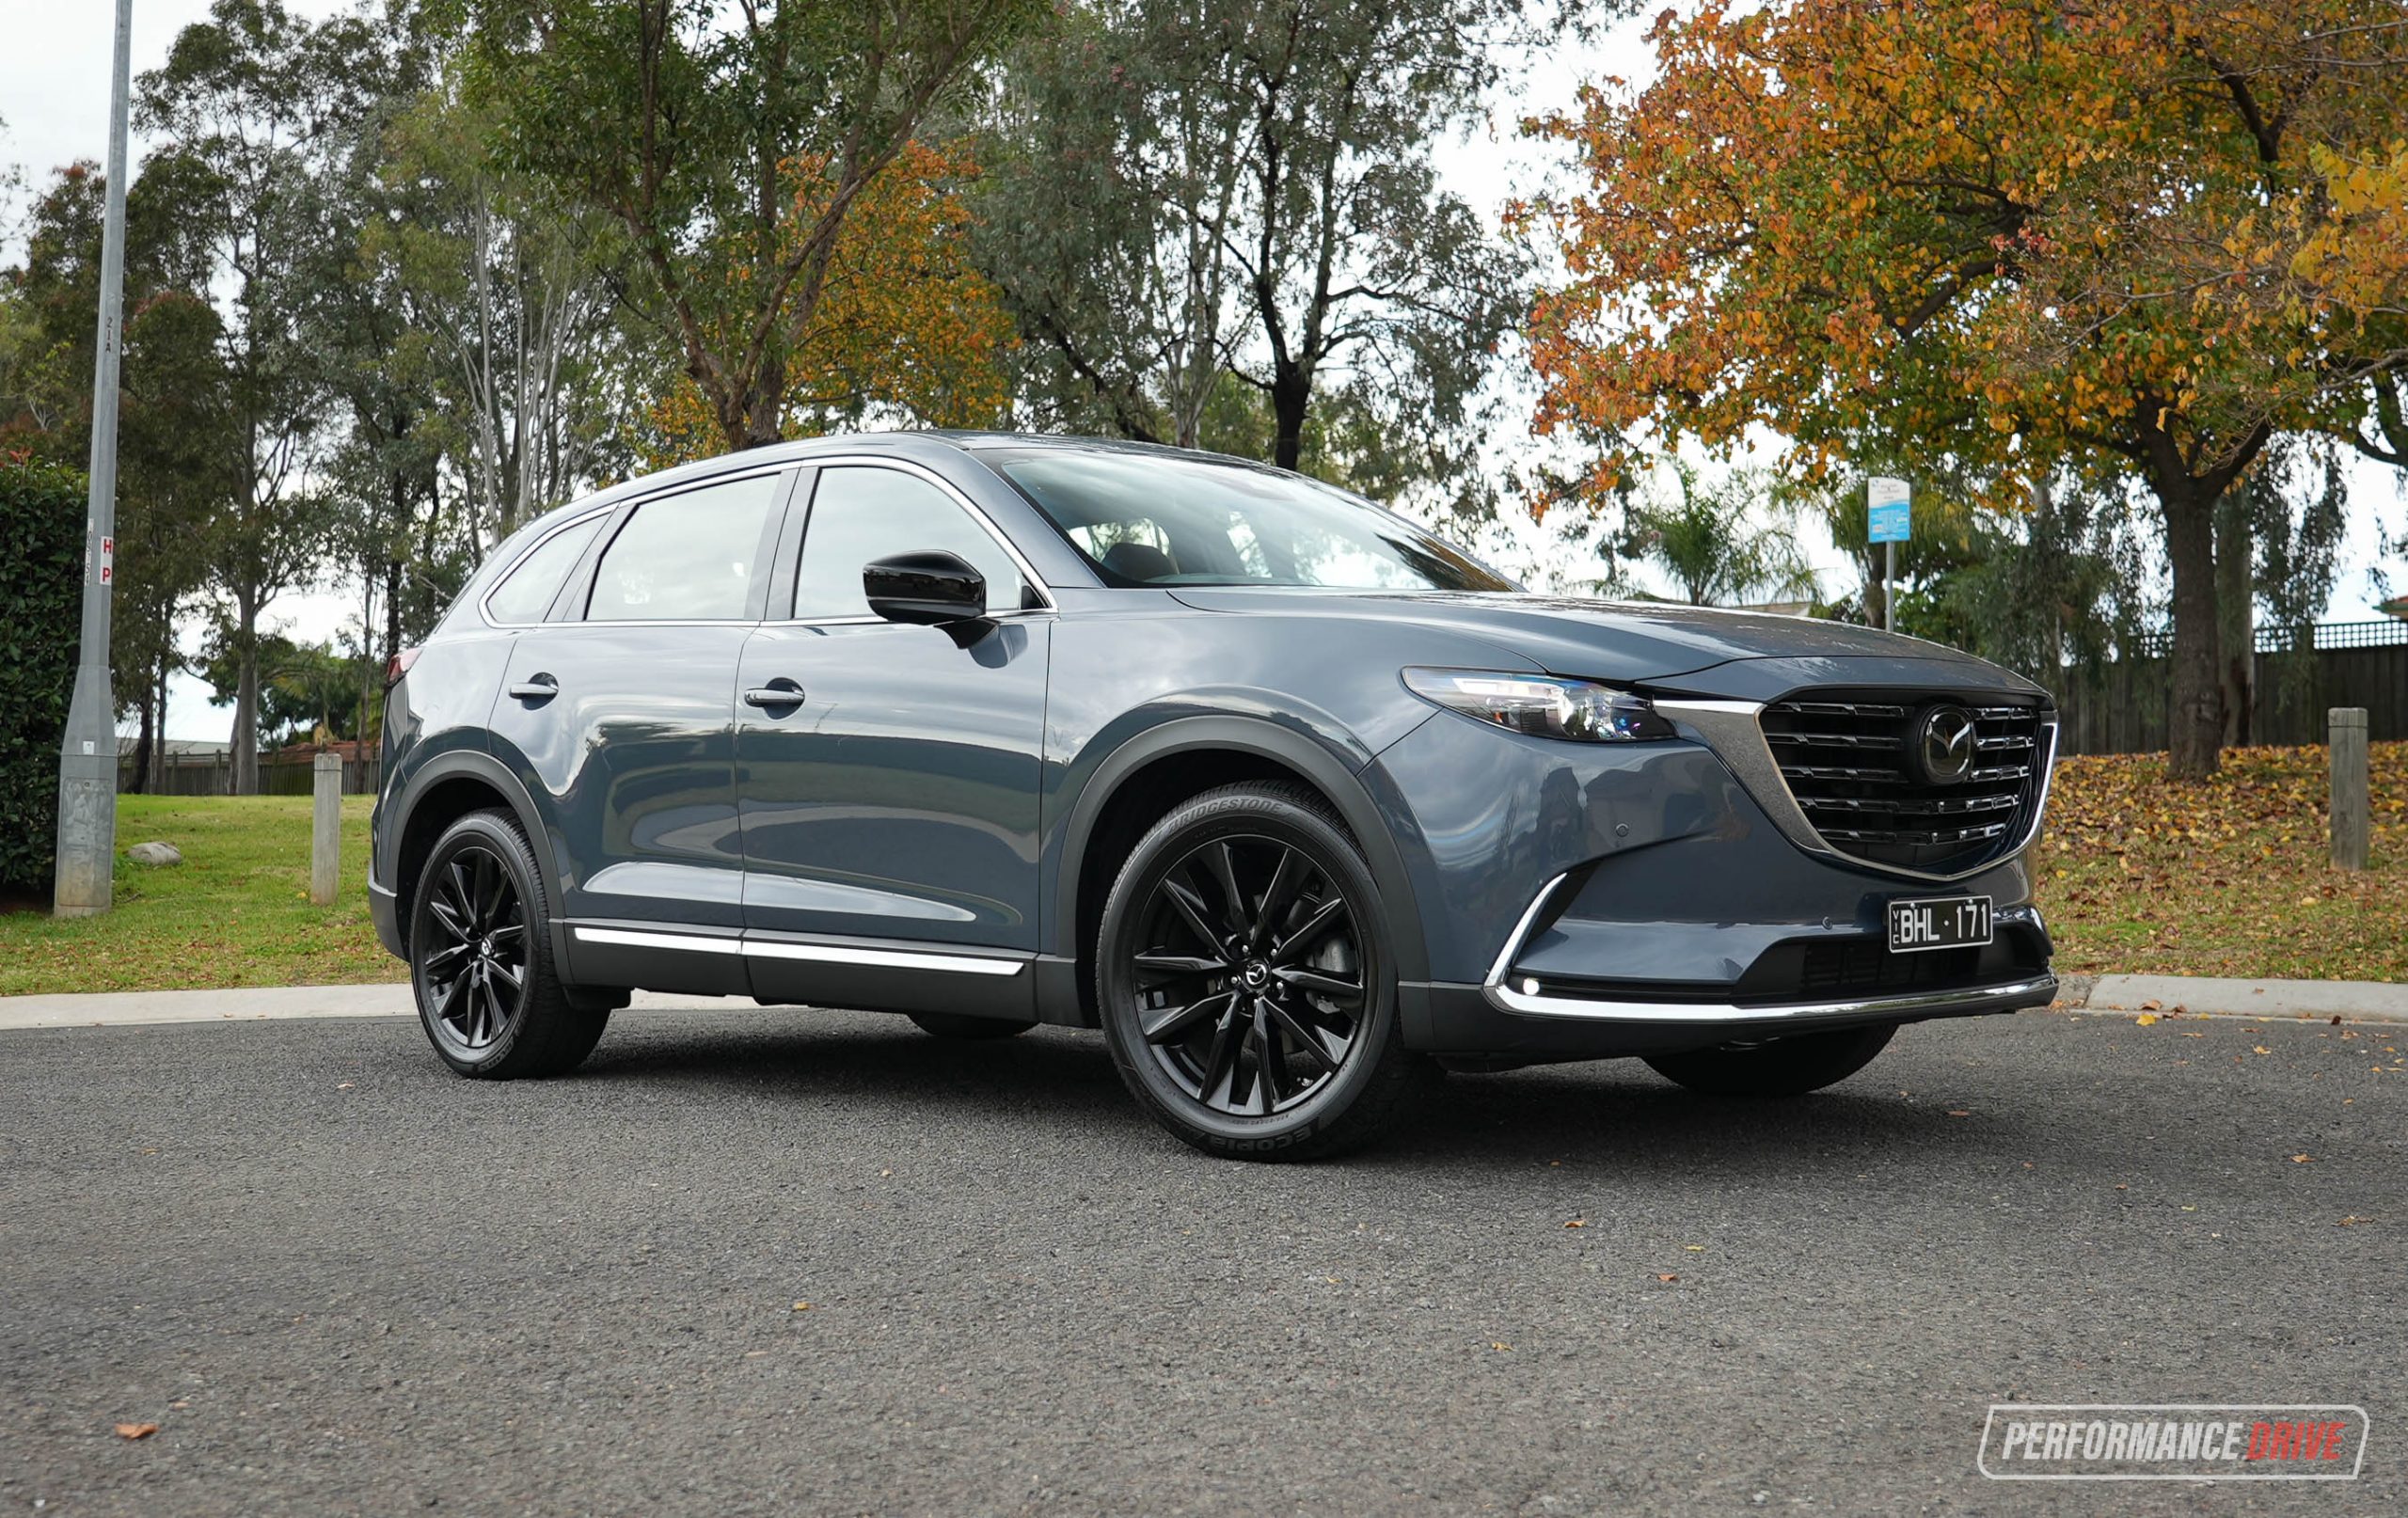 2021 Mazda CX-9 GT SP review